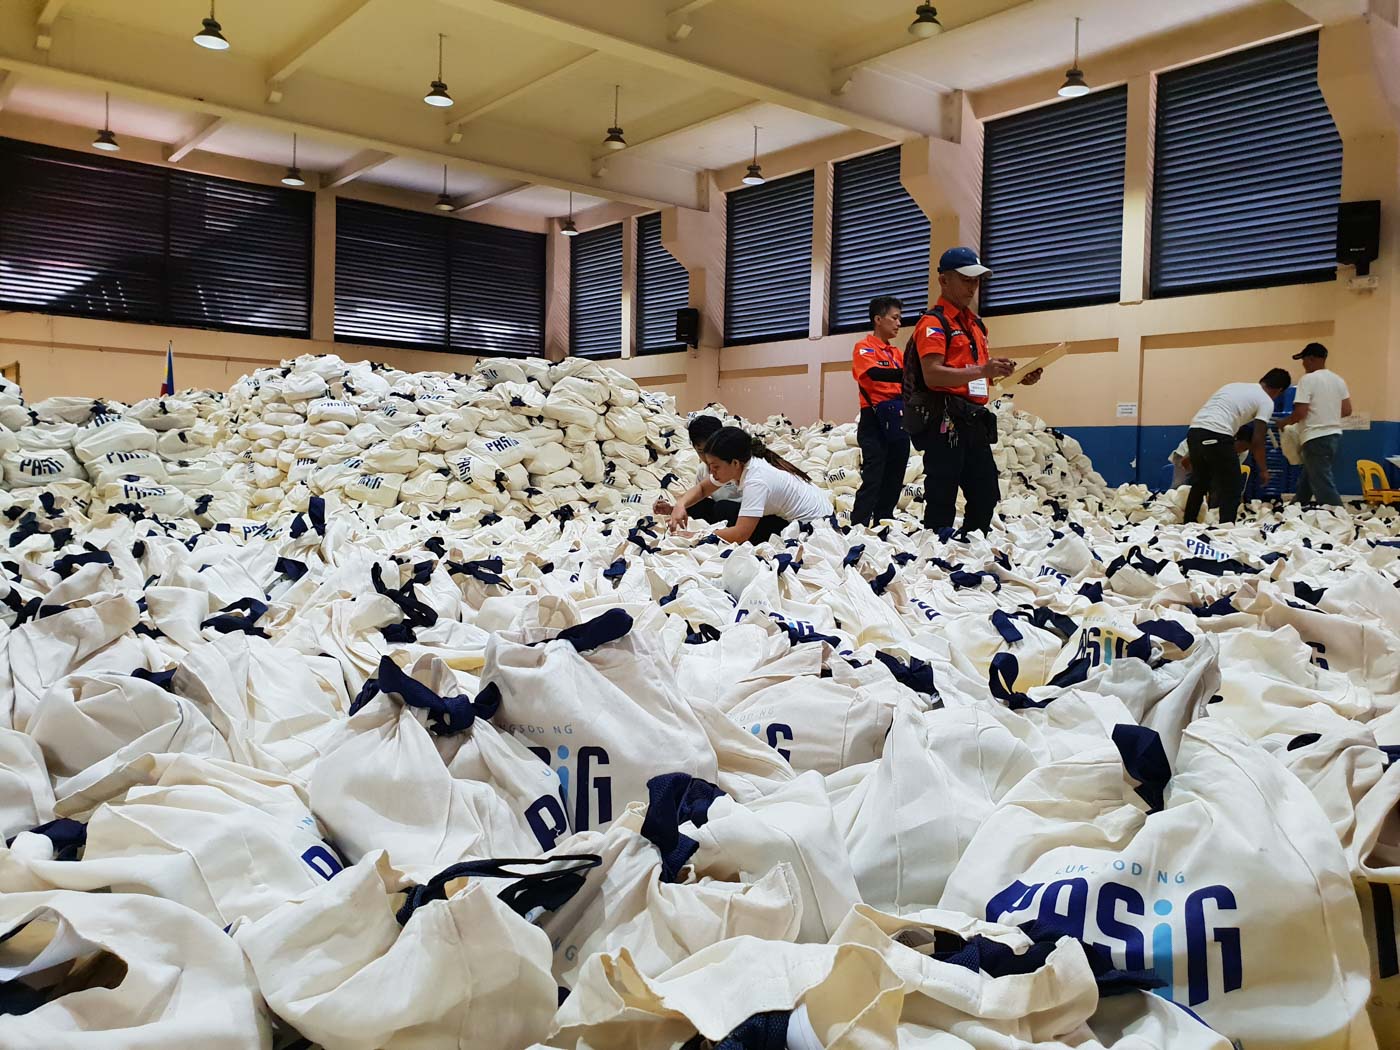 FROM SAVINGS. Cleaning up the bureaucracy yielded savings in the local government's finances, enabling Pasig to produce enough goody bags for every family in the city. Photo by JC Gotinga/Rappler 